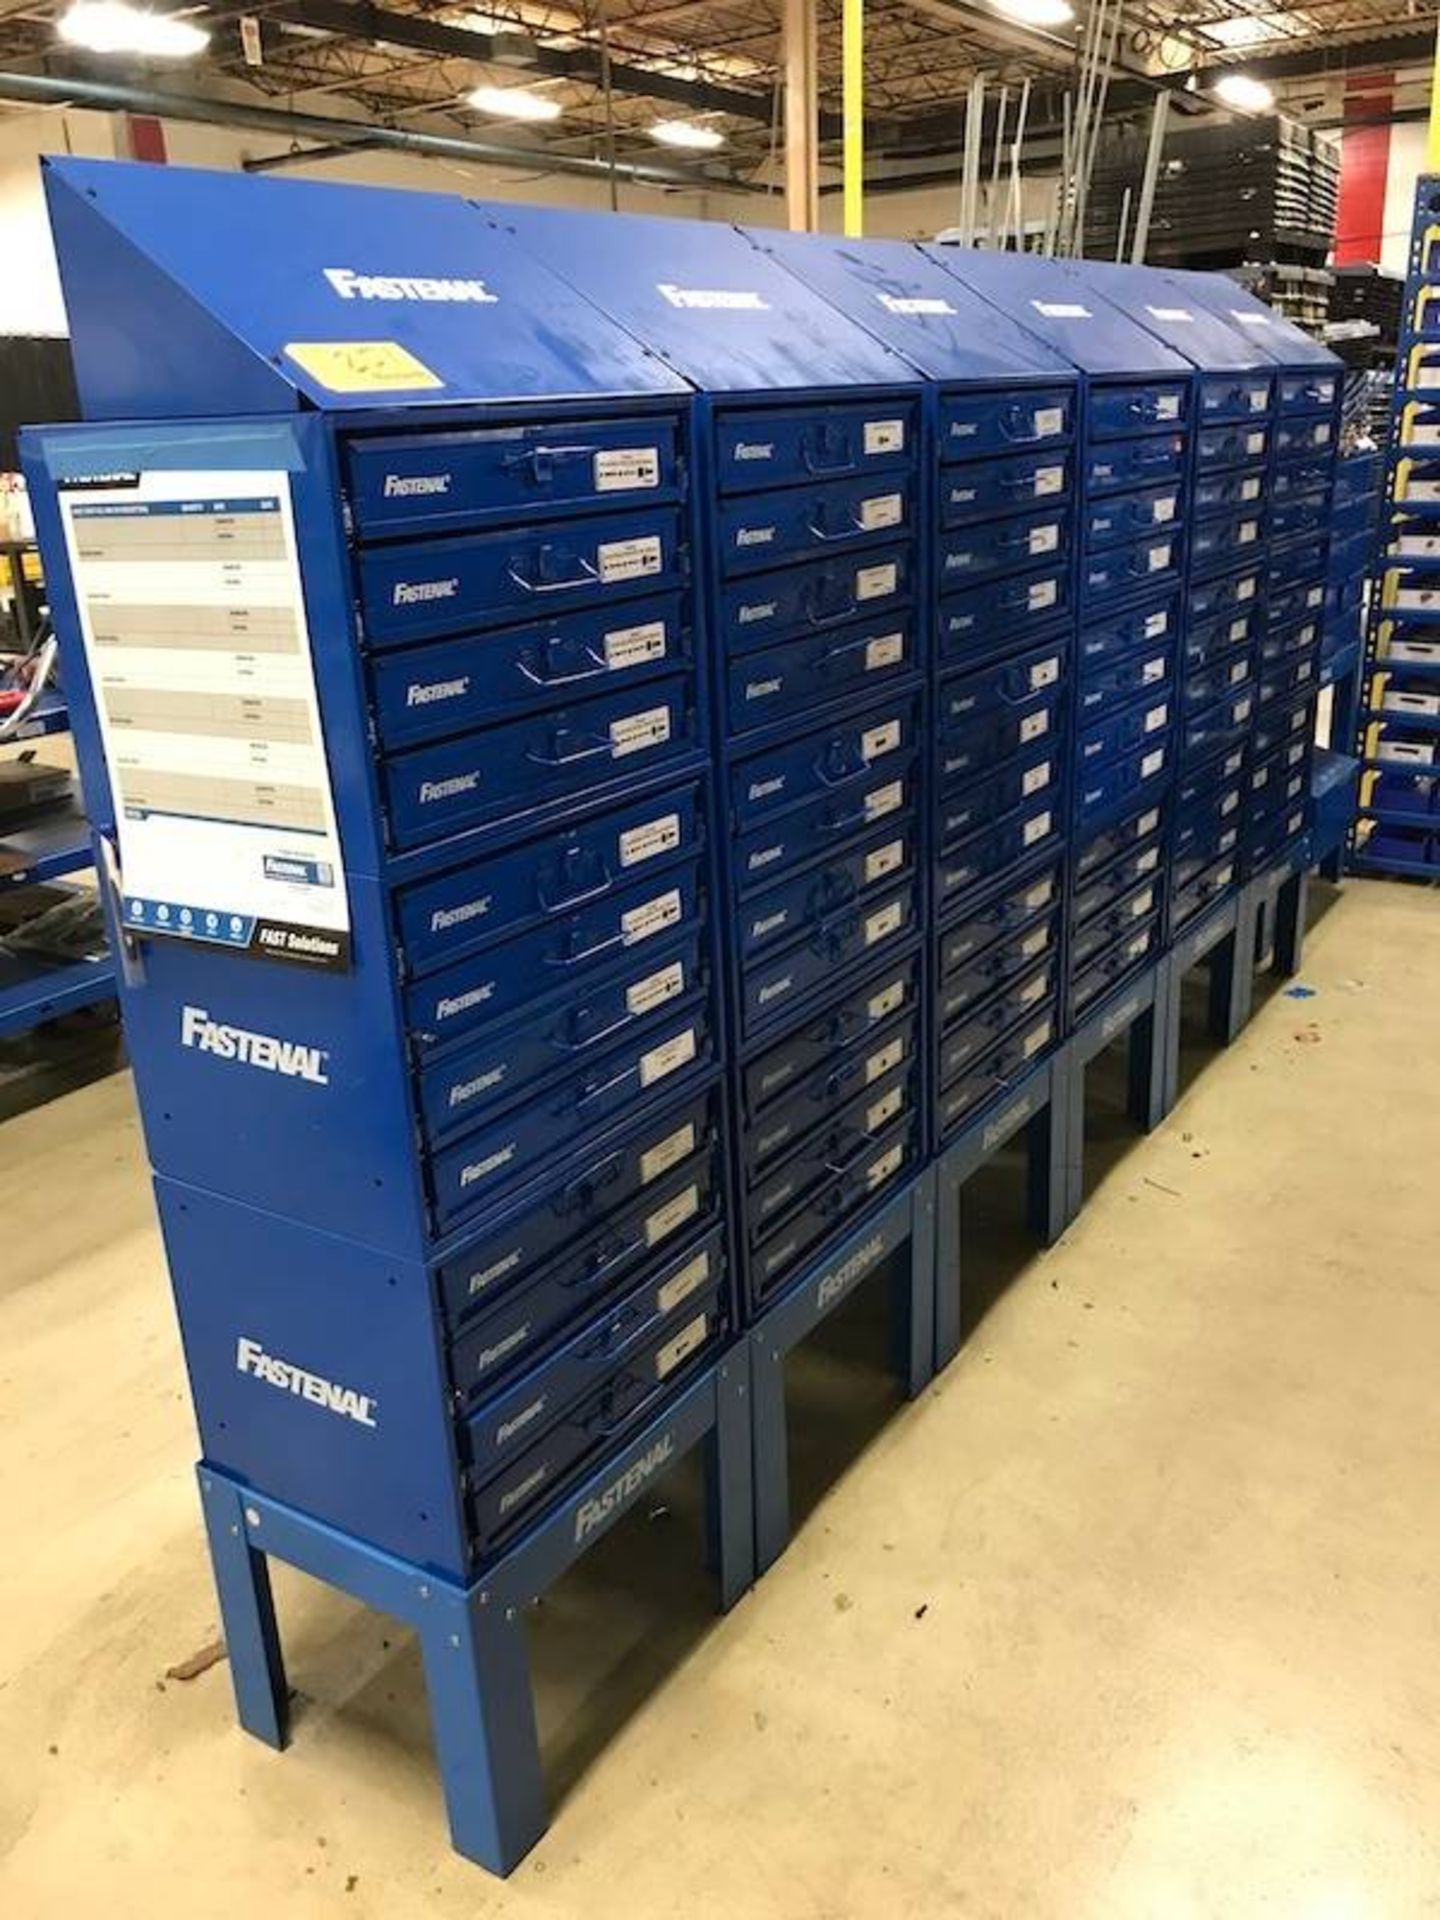 Contents of Fastenal Parts Bins